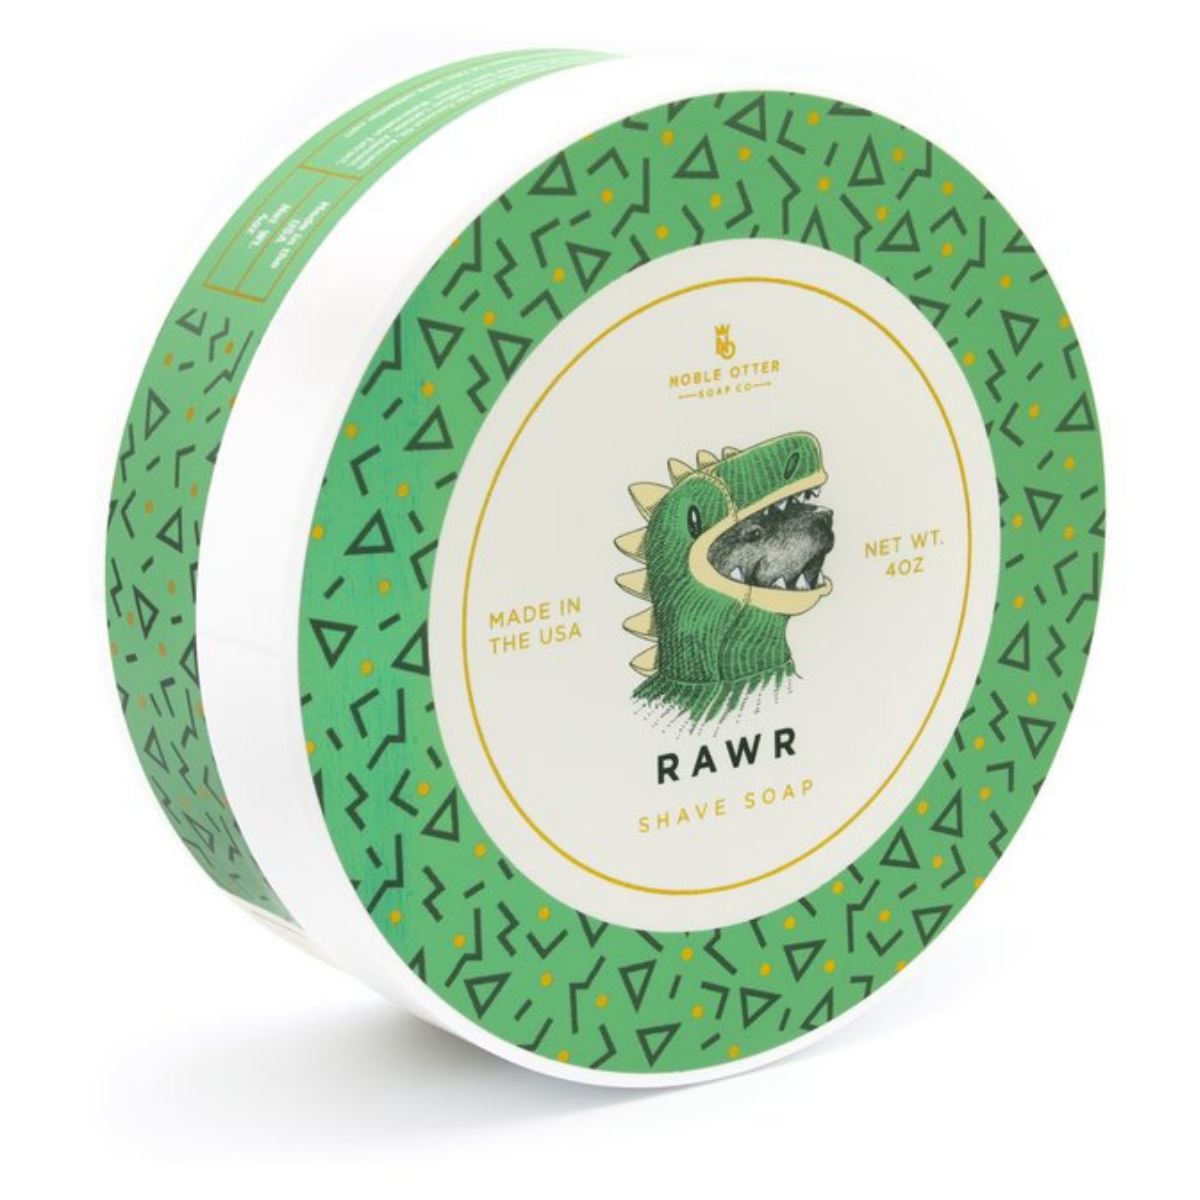 Primary image of Rawr Shave Soap